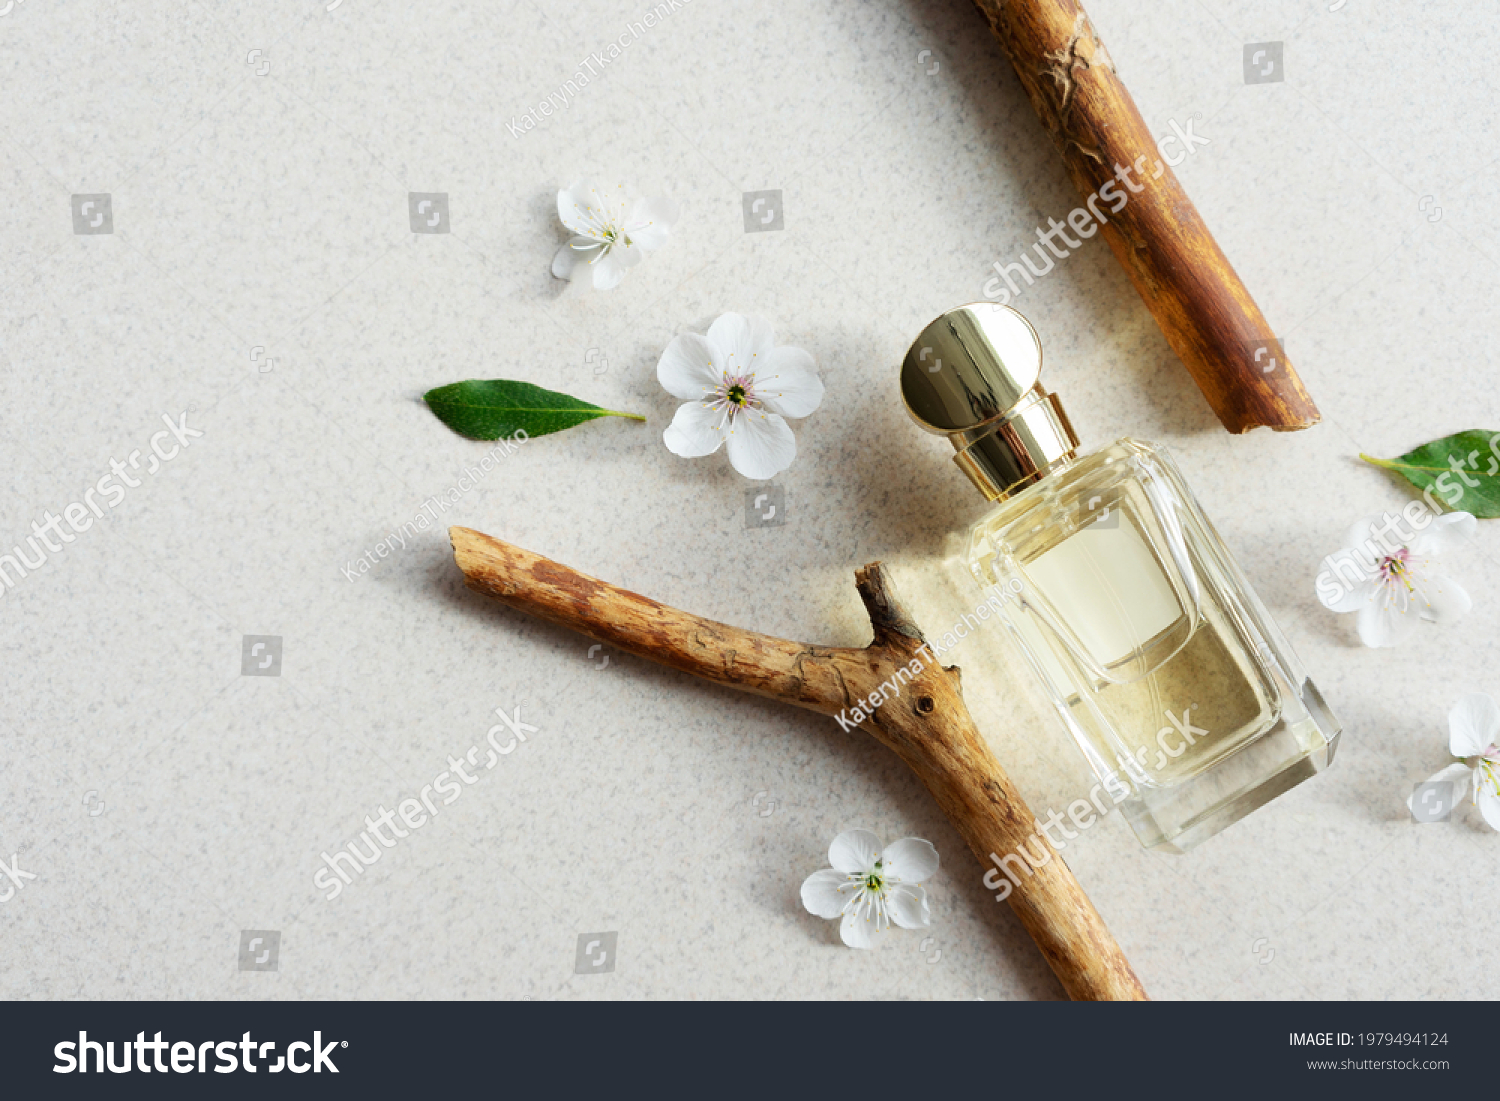 glass perfume bottle on light background with wooden fragments and flowers with sunlight. Summer floral woody perfume concept. Copy space #1979494124